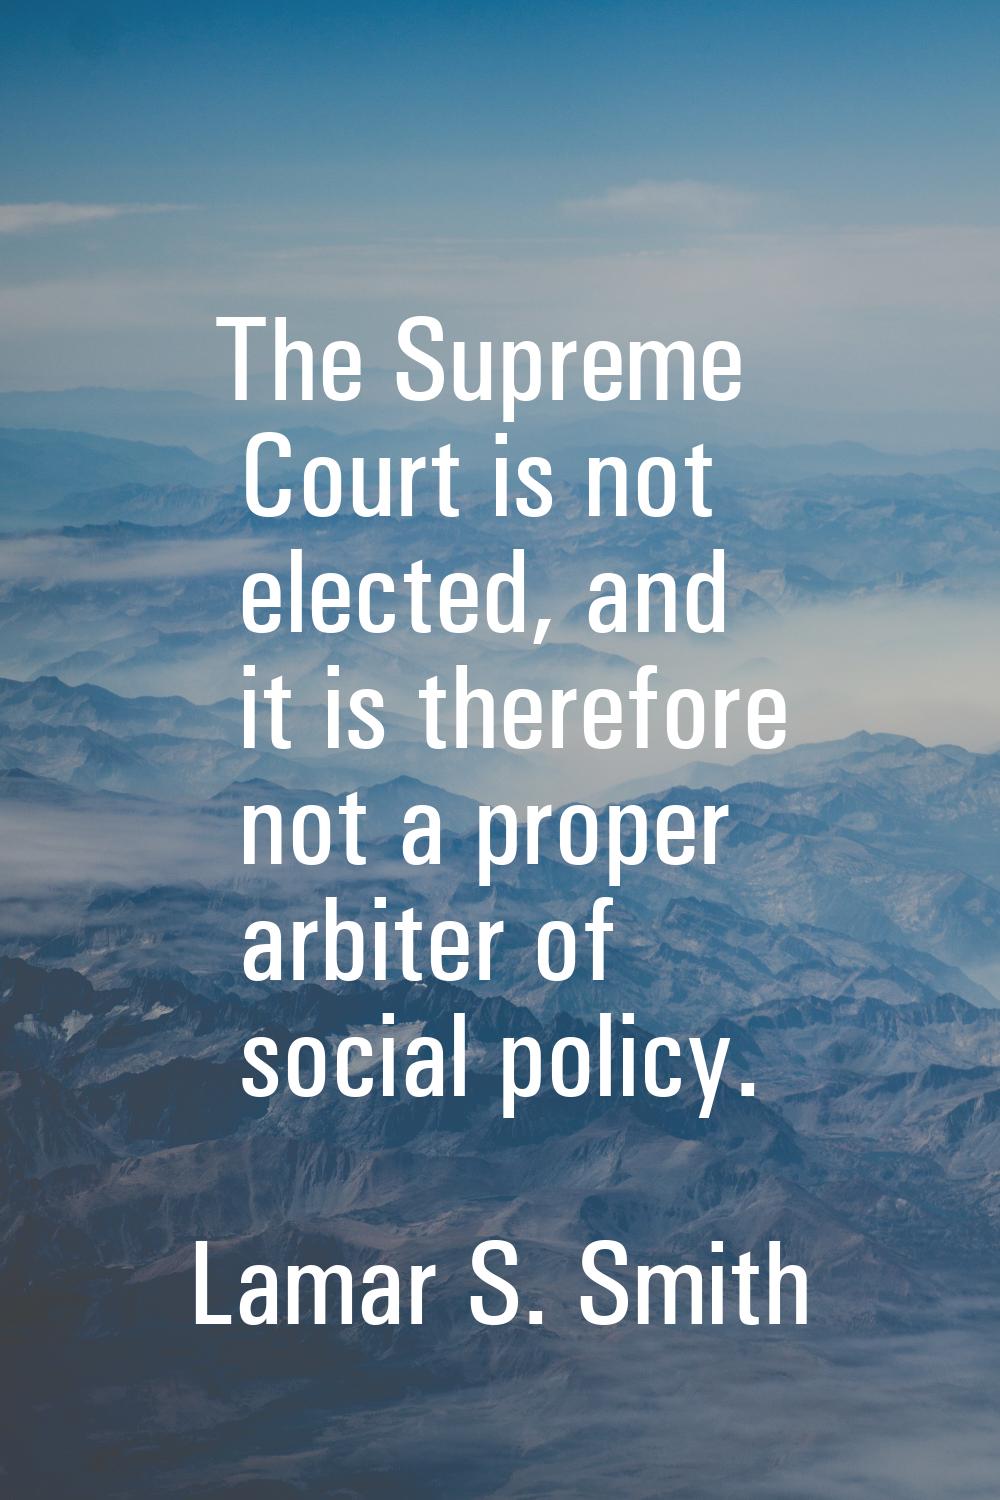 The Supreme Court is not elected, and it is therefore not a proper arbiter of social policy.